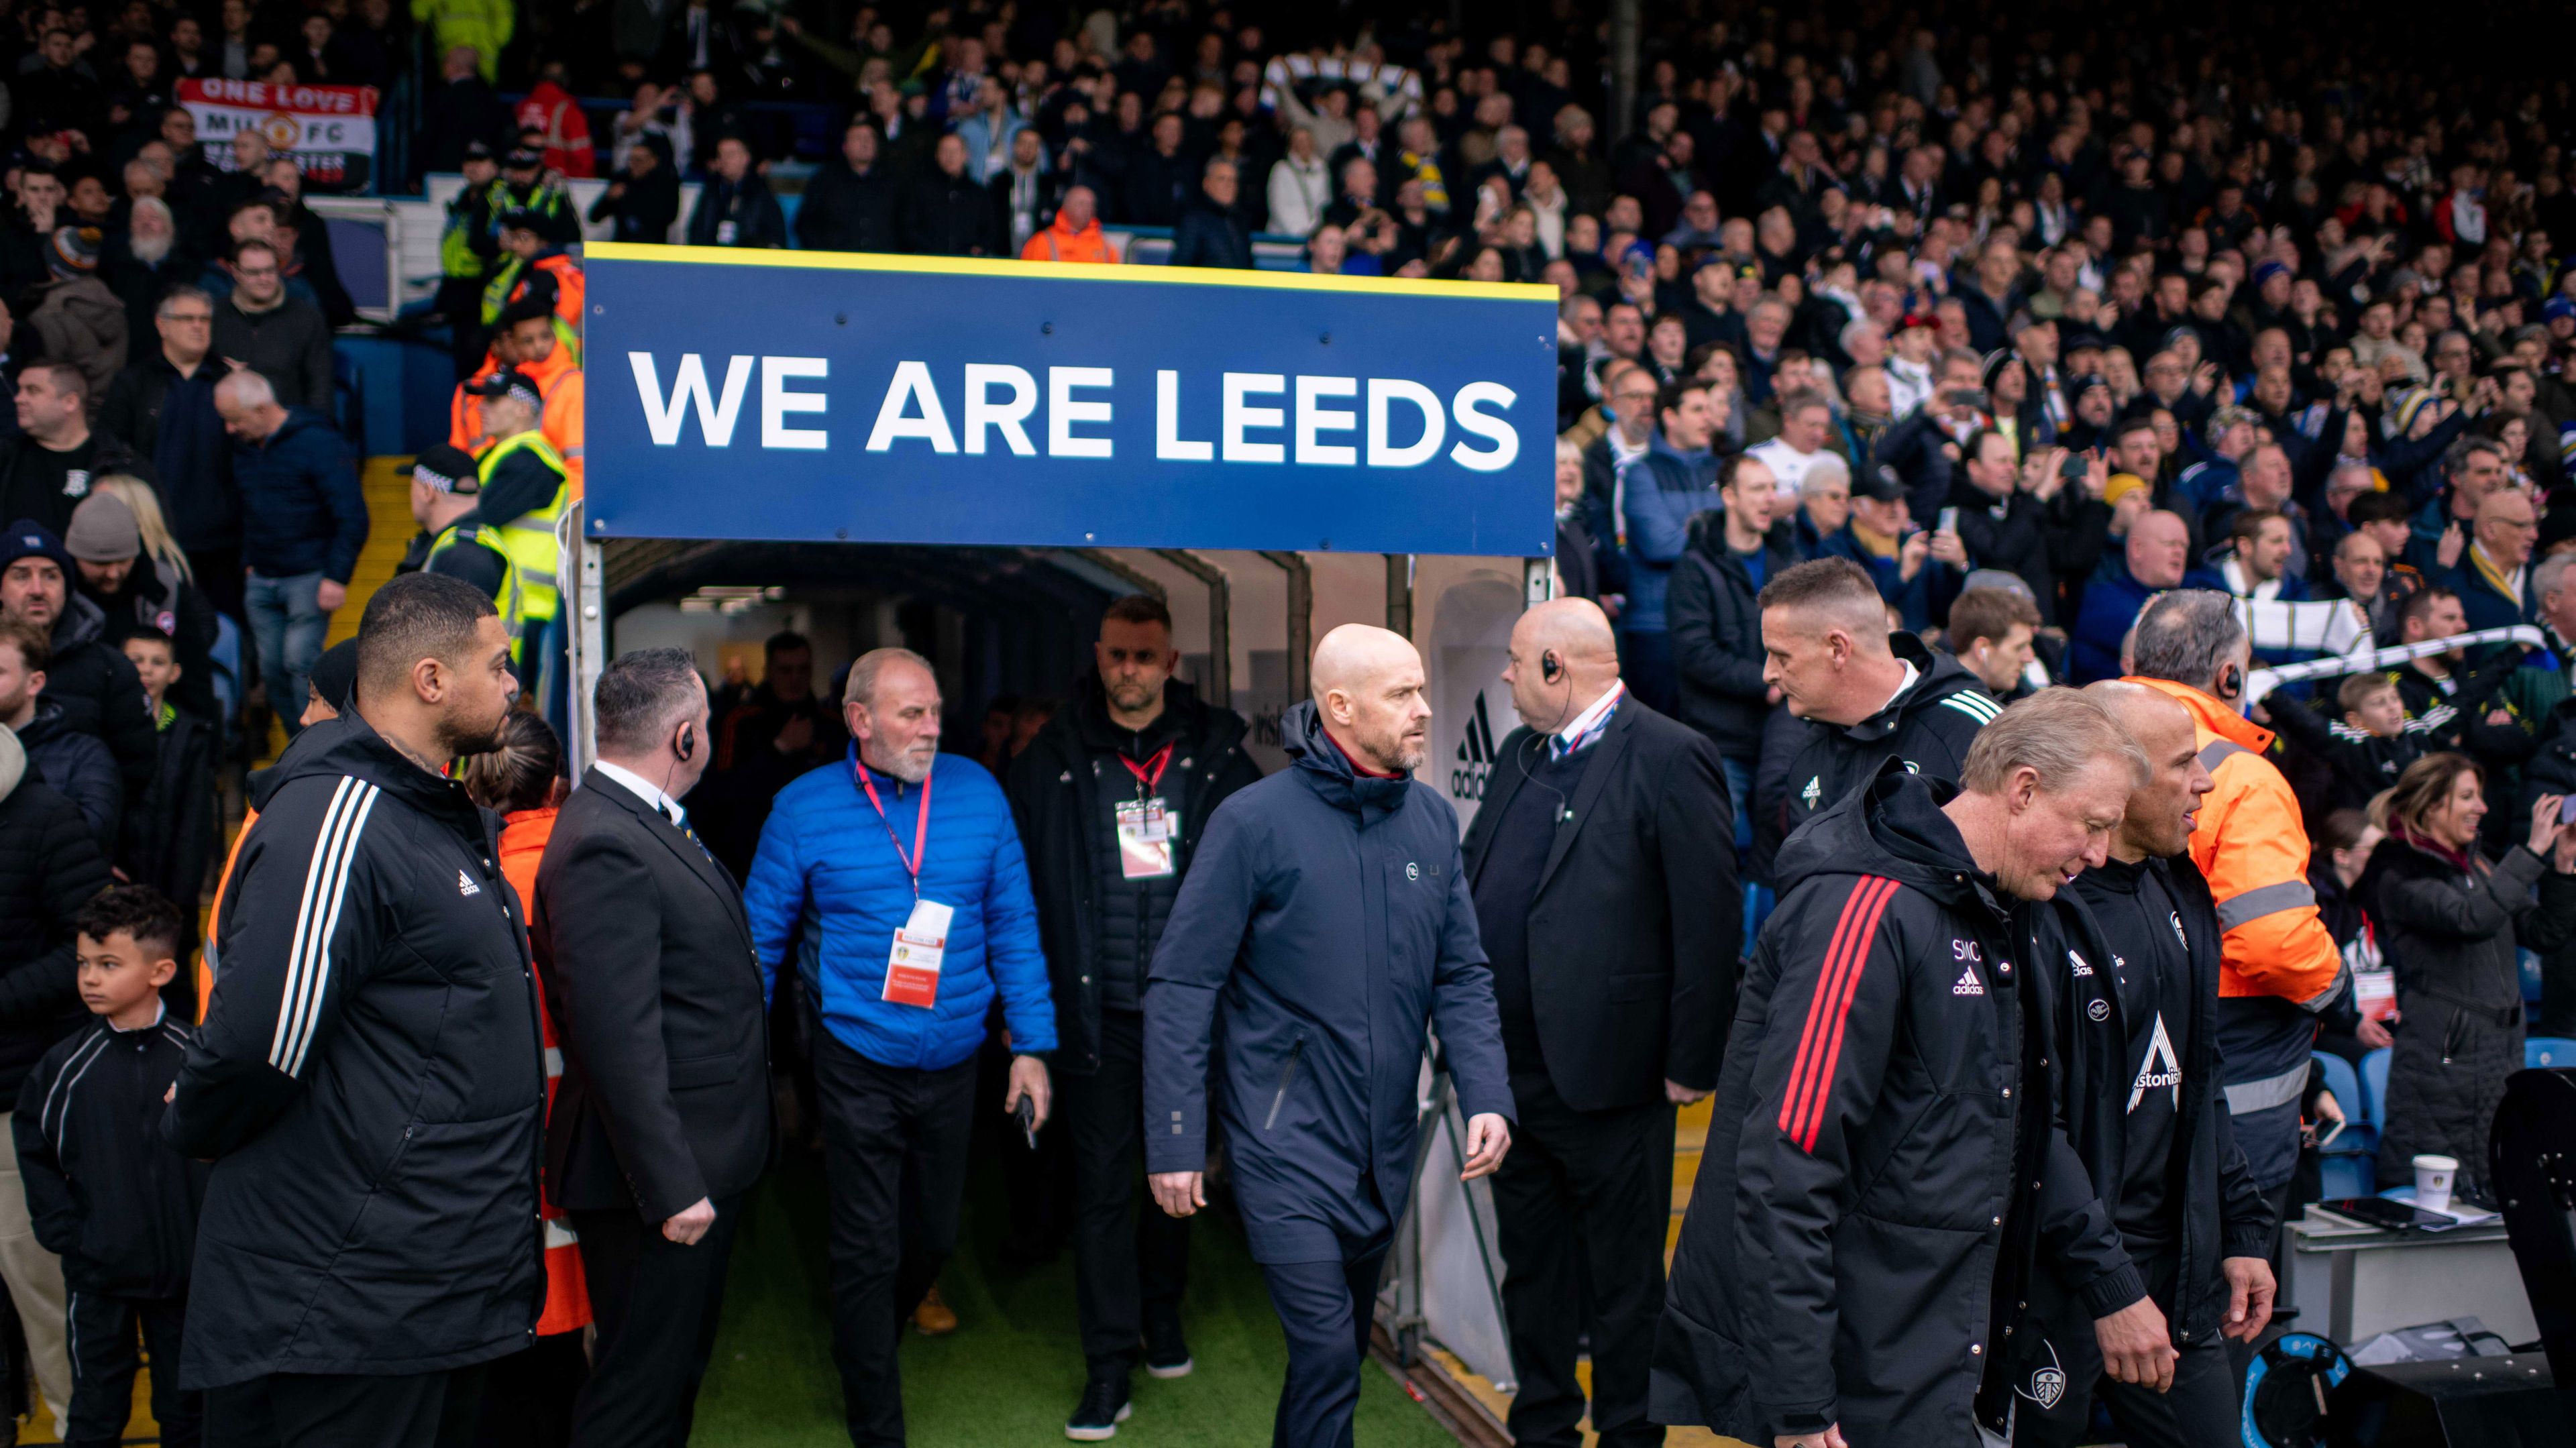 Manchester United manager Erik ten Hag walks out of the tunnel prior to the Premier League match between Leeds United and Manchester United at Elland Road on February 12, 2023 in Leeds, United Kingdom. (Photo by Ash Donelon/Manchester United via Getty Images)